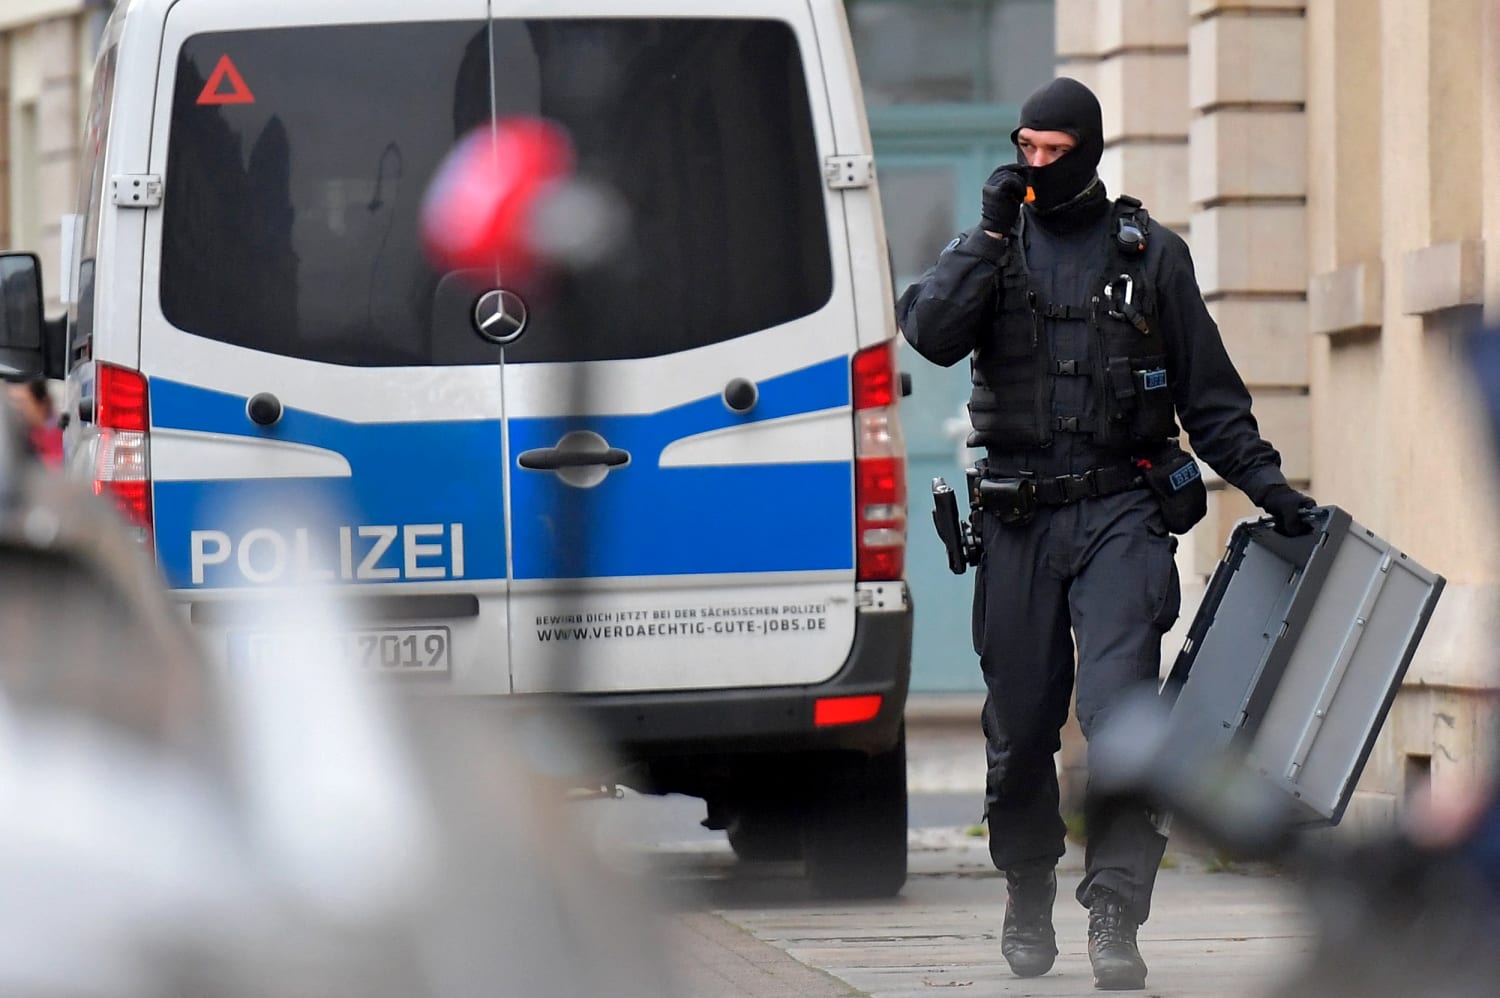 German police conduct raids over alleged Covid death threats